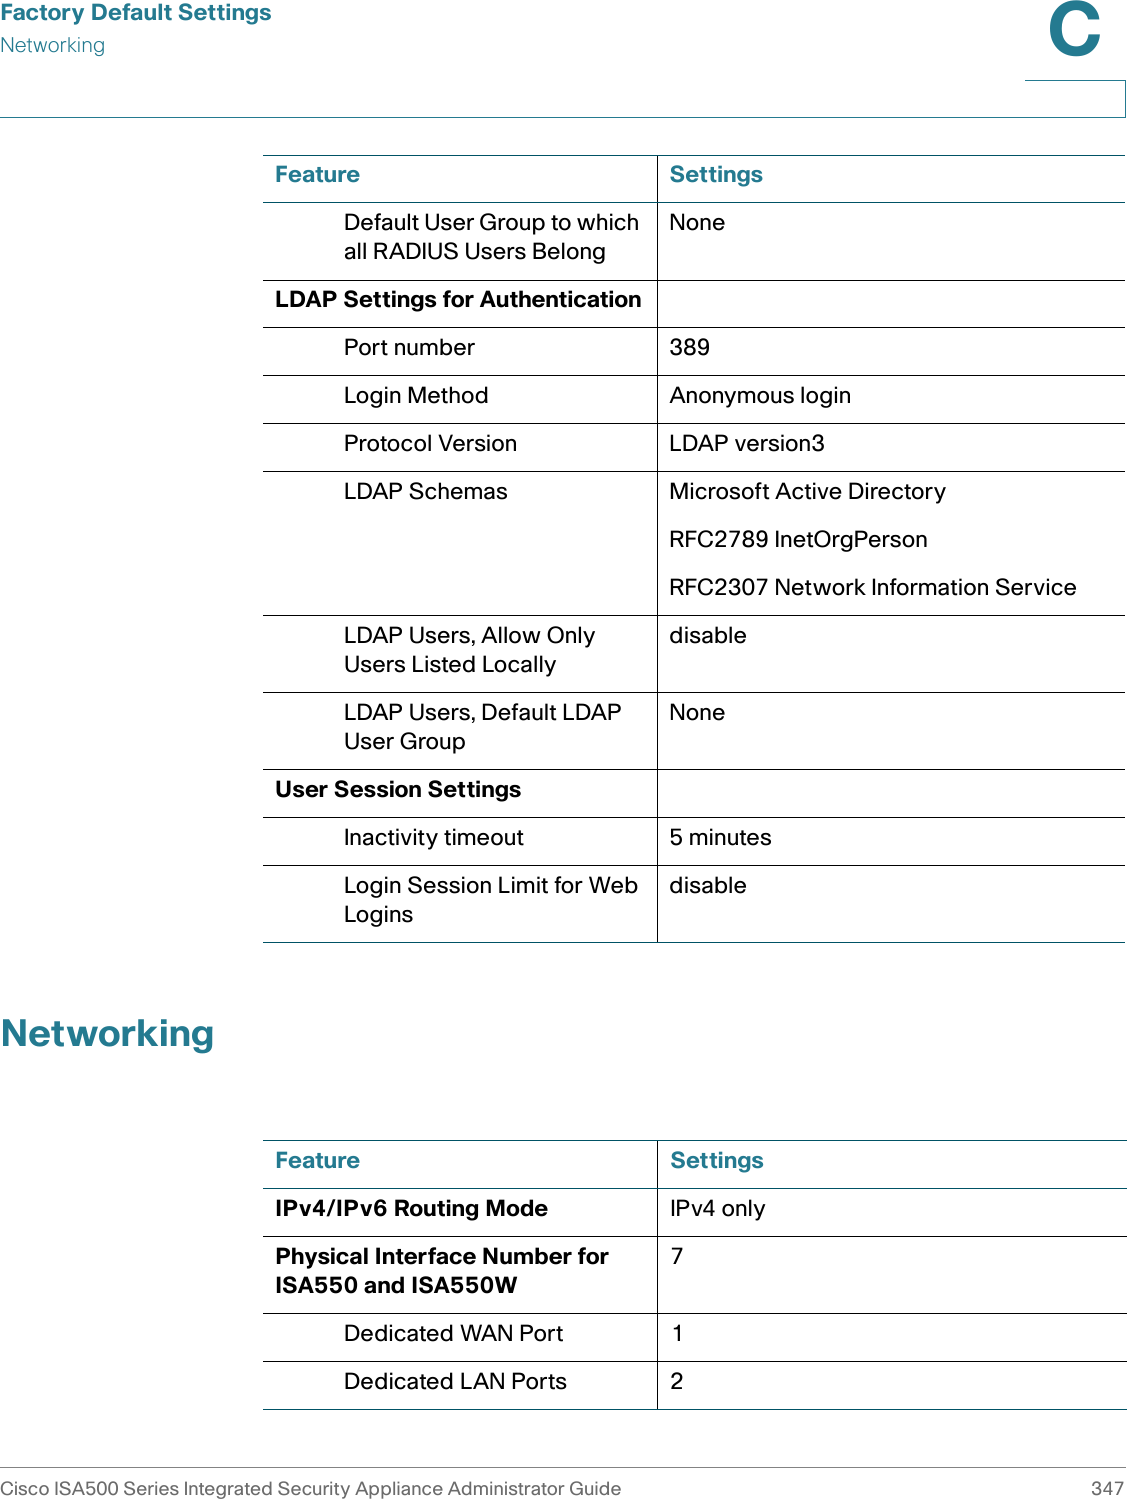 Factory Default SettingsNetworkingCisco ISA500 Series Integrated Security Appliance Administrator Guide 347C NetworkingDefault User Group to which all RADIUS Users BelongNone LDAP Settings for AuthenticationPort number 389Login Method Anonymous loginProtocol Version LDAP version3LDAP Schemas Microsoft Active DirectoryRFC2789 InetOrgPersonRFC2307 Network Information ServiceLDAP Users, Allow Only Users Listed LocallydisableLDAP Users, Default LDAP User GroupNoneUser Session SettingsInactivity timeout 5 minutesLogin Session Limit for Web LoginsdisableFeature SettingsFeature SettingsIPv4/IPv6 Routing Mode IPv4 onlyPhysical Interface Number for ISA550 and ISA550W7Dedicated WAN Port 1Dedicated LAN Ports 2